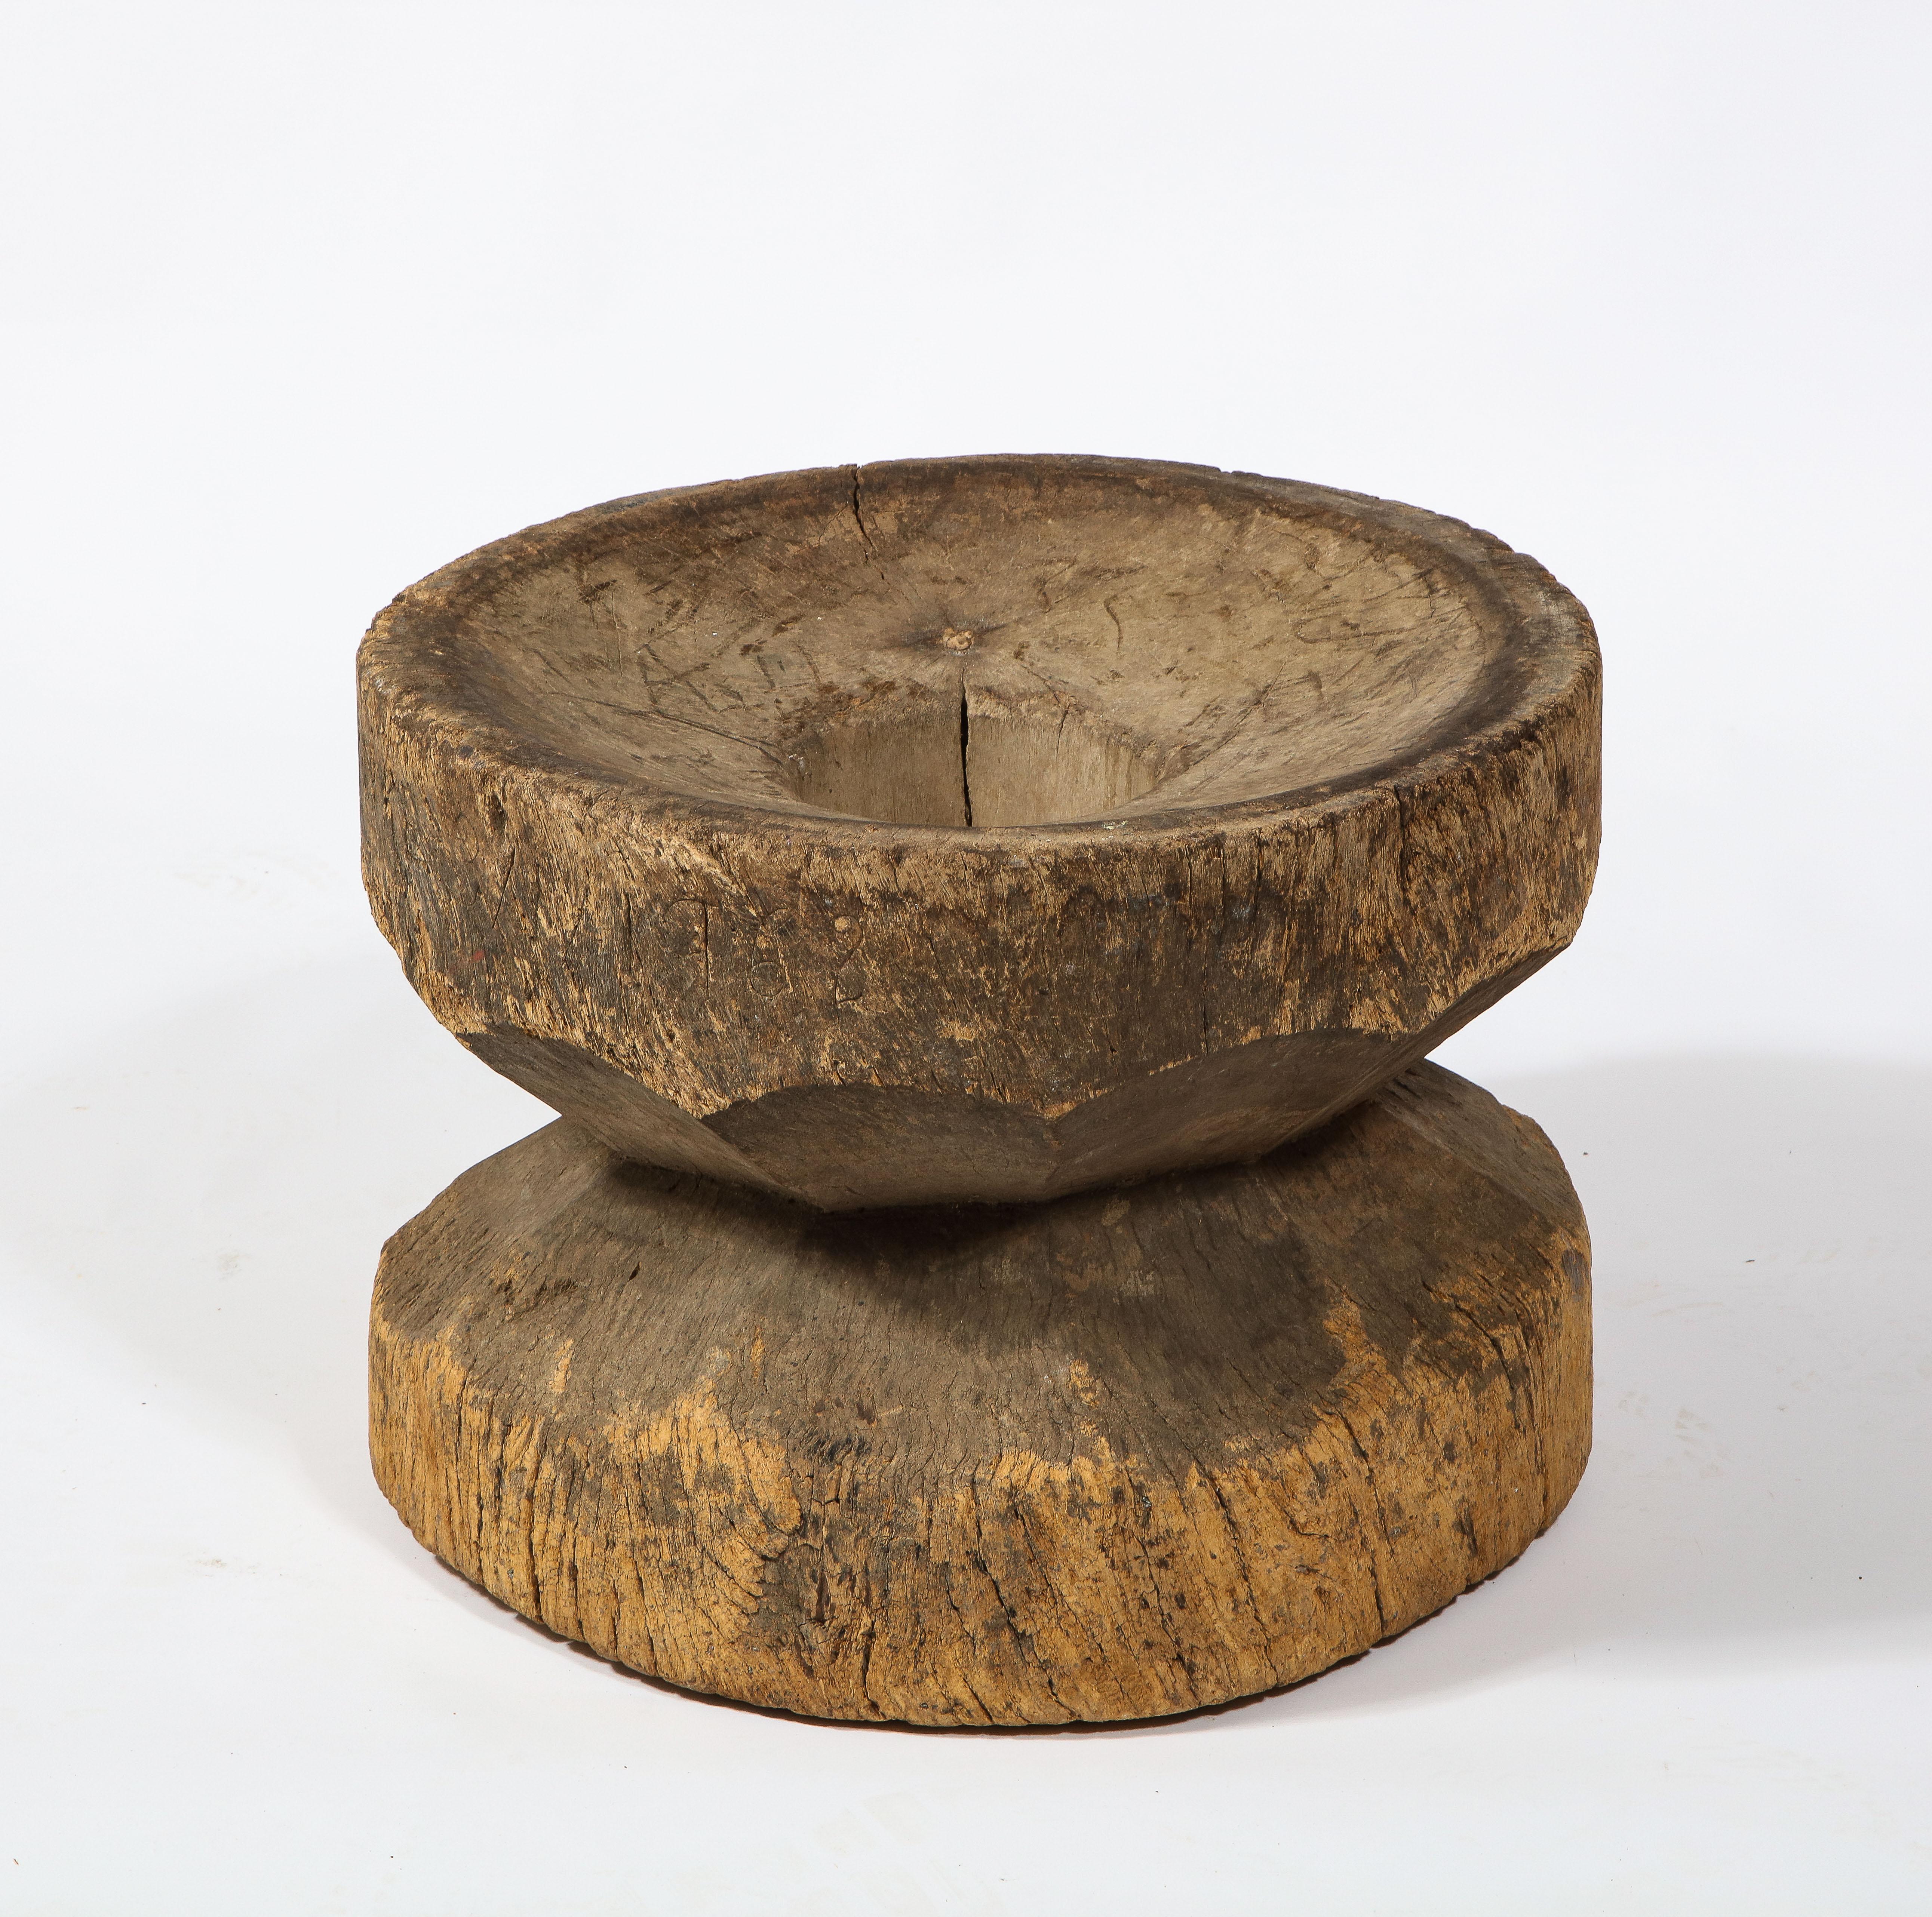 20th Century Carved Solid Rustic Organic Tree Trunk Table Stool, Africa, 1950's